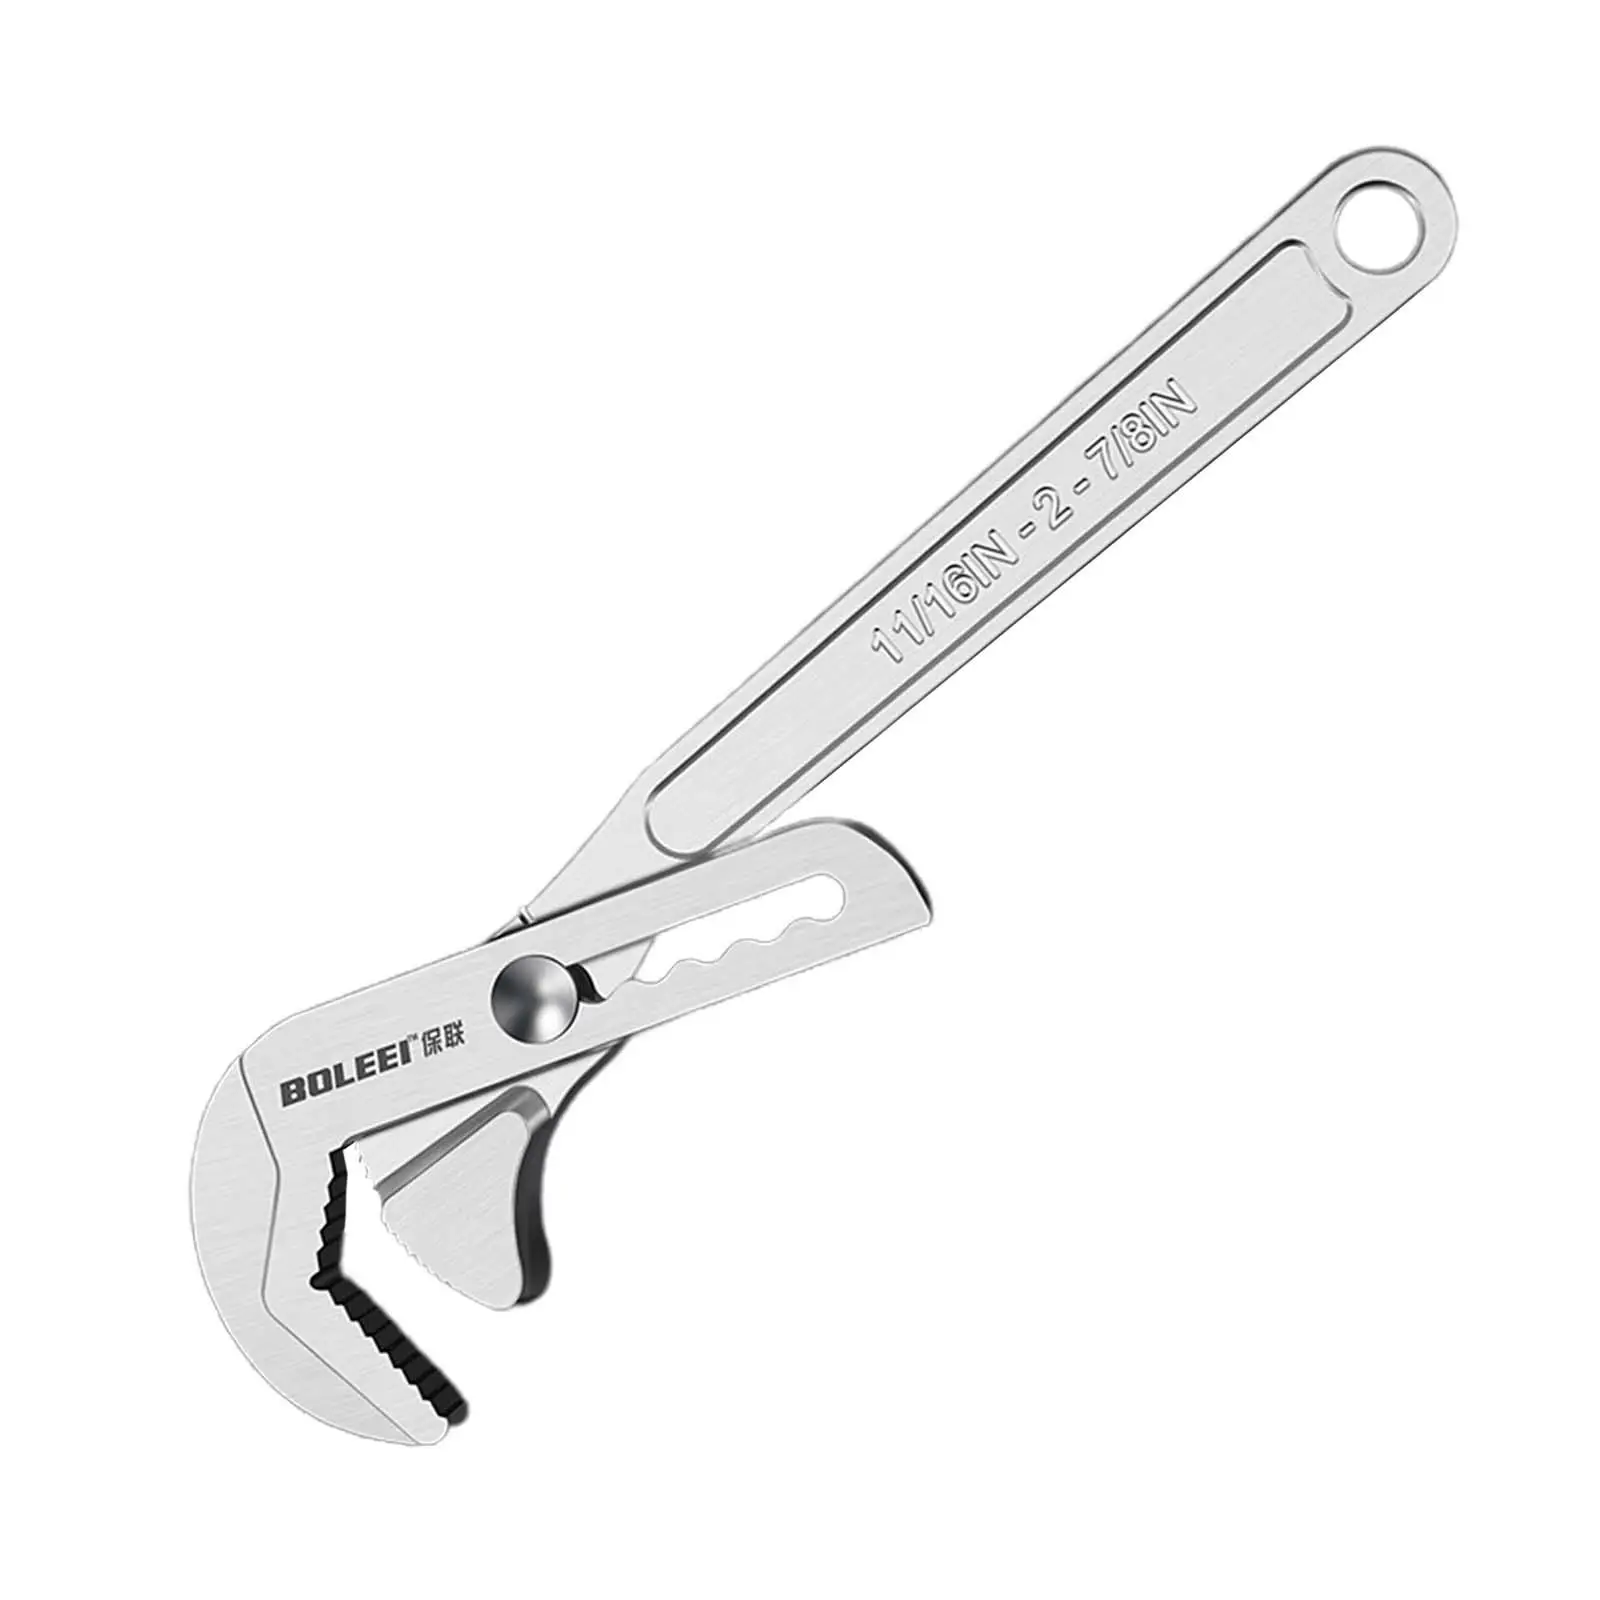 Adjustable Wrench Multipurpose 14mm~67mm Bathroom Spanner Wrenches Hand Tools Bathroom Wrench for Car Repairing Home Maintenance